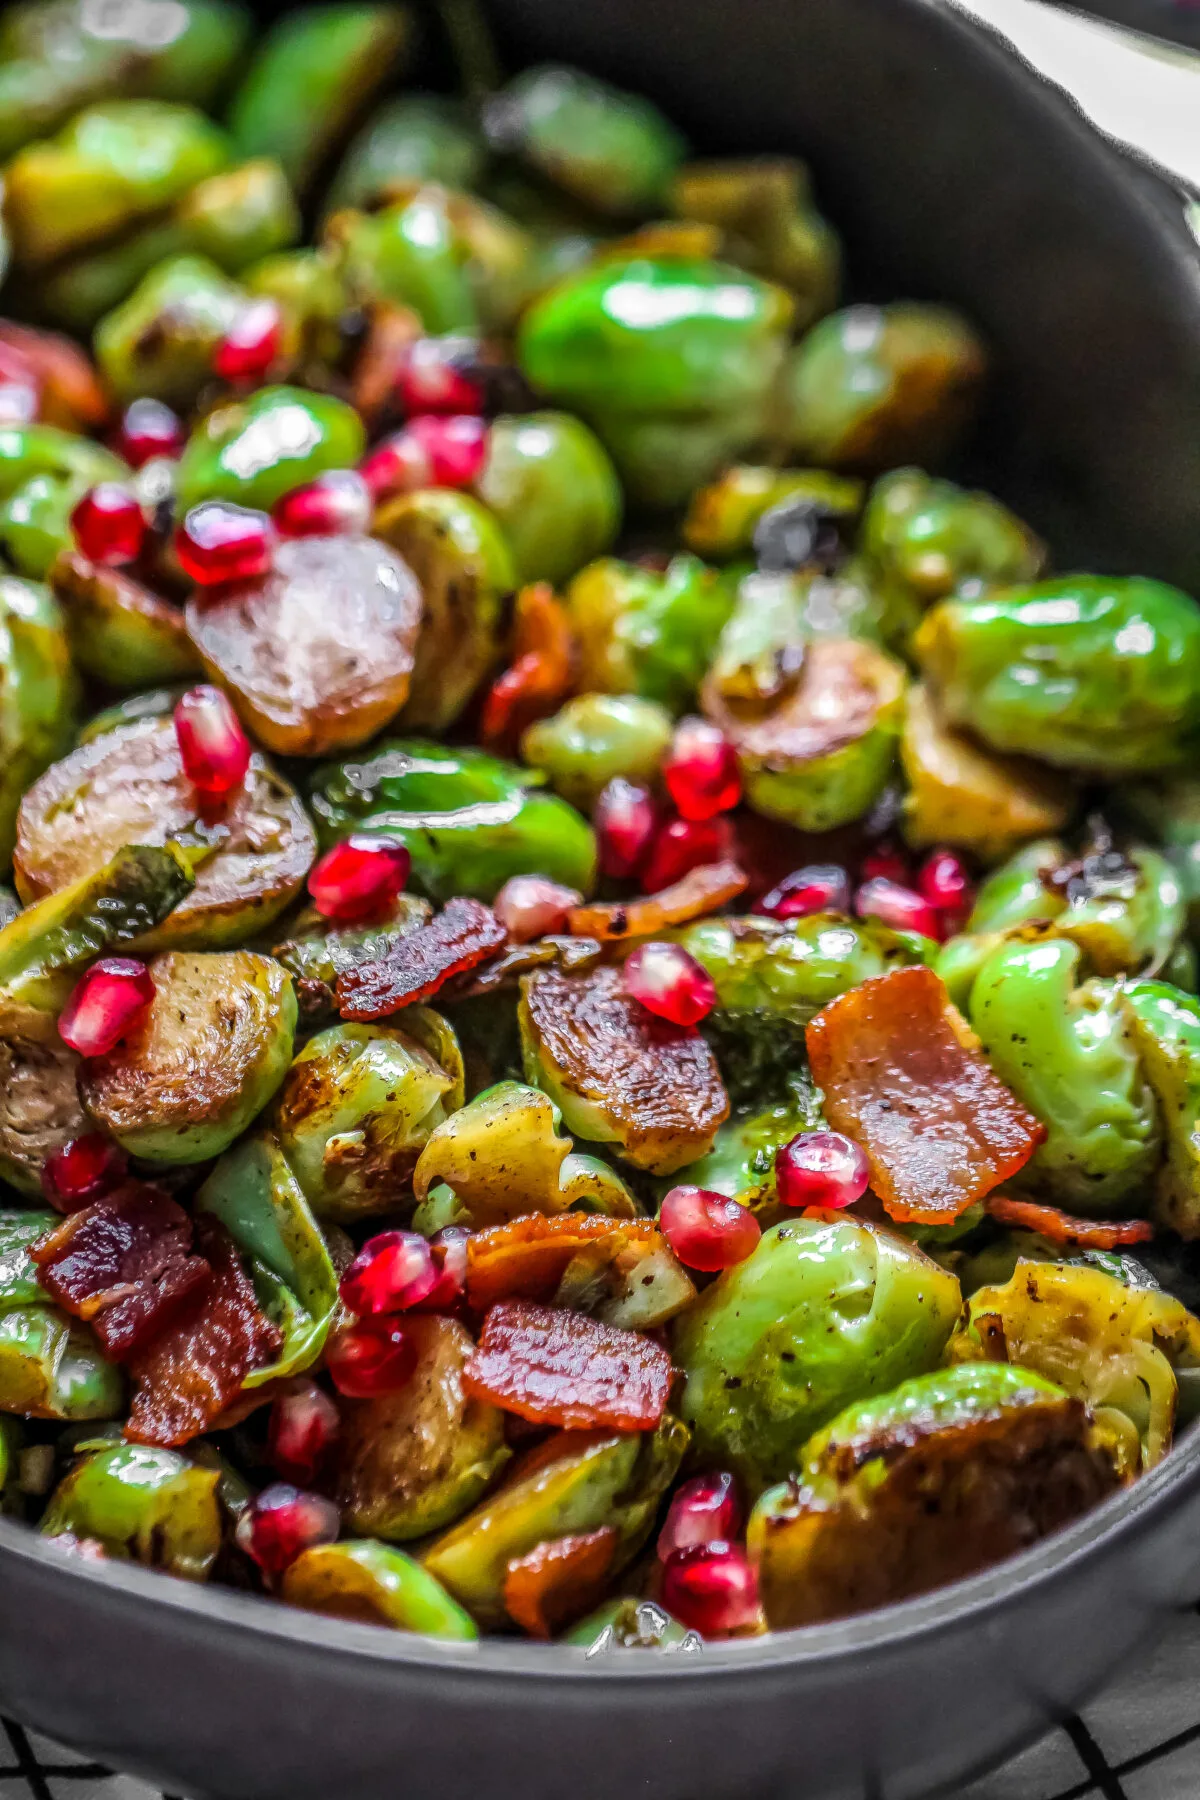 This recipe for bacon and pomegranate roasted Brussels sprouts is tangy, sweet, salty and delicious. It's a perfect Christmas side dish!